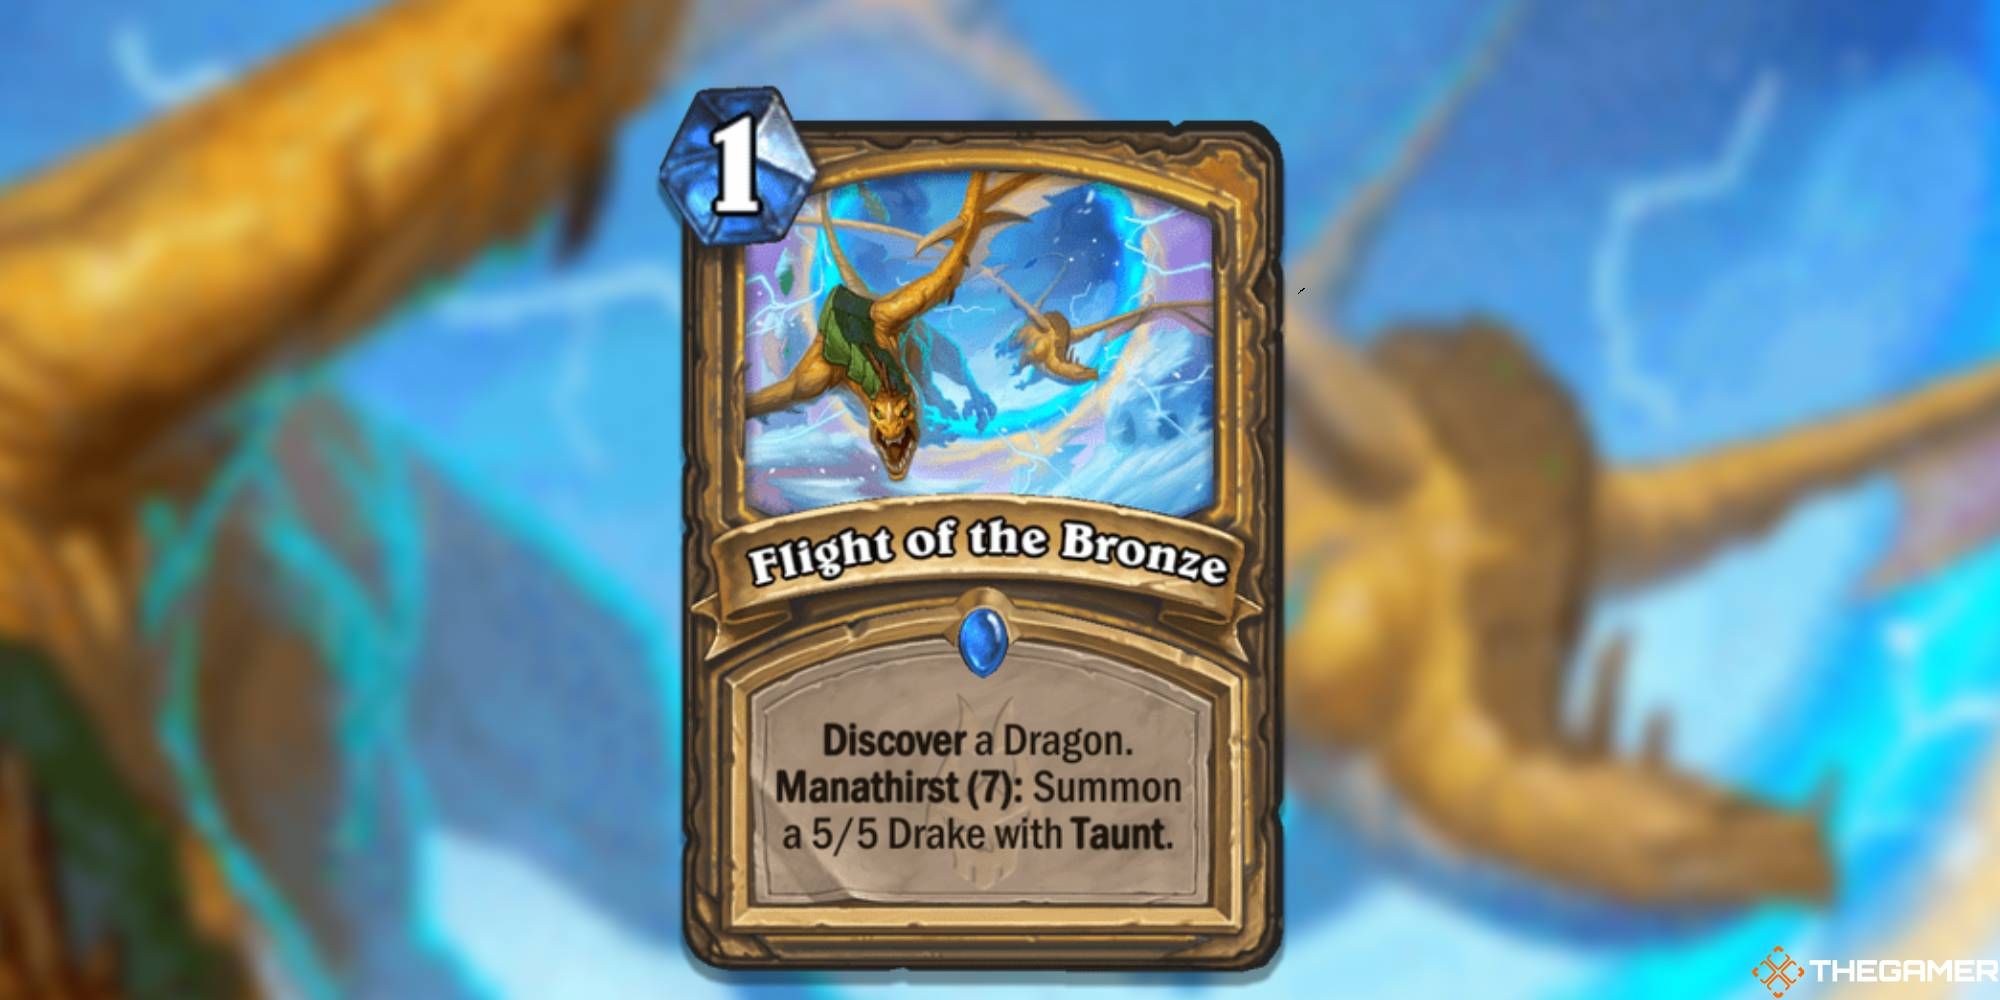 Flight of the Bronze Hearthstone March of the Lich King